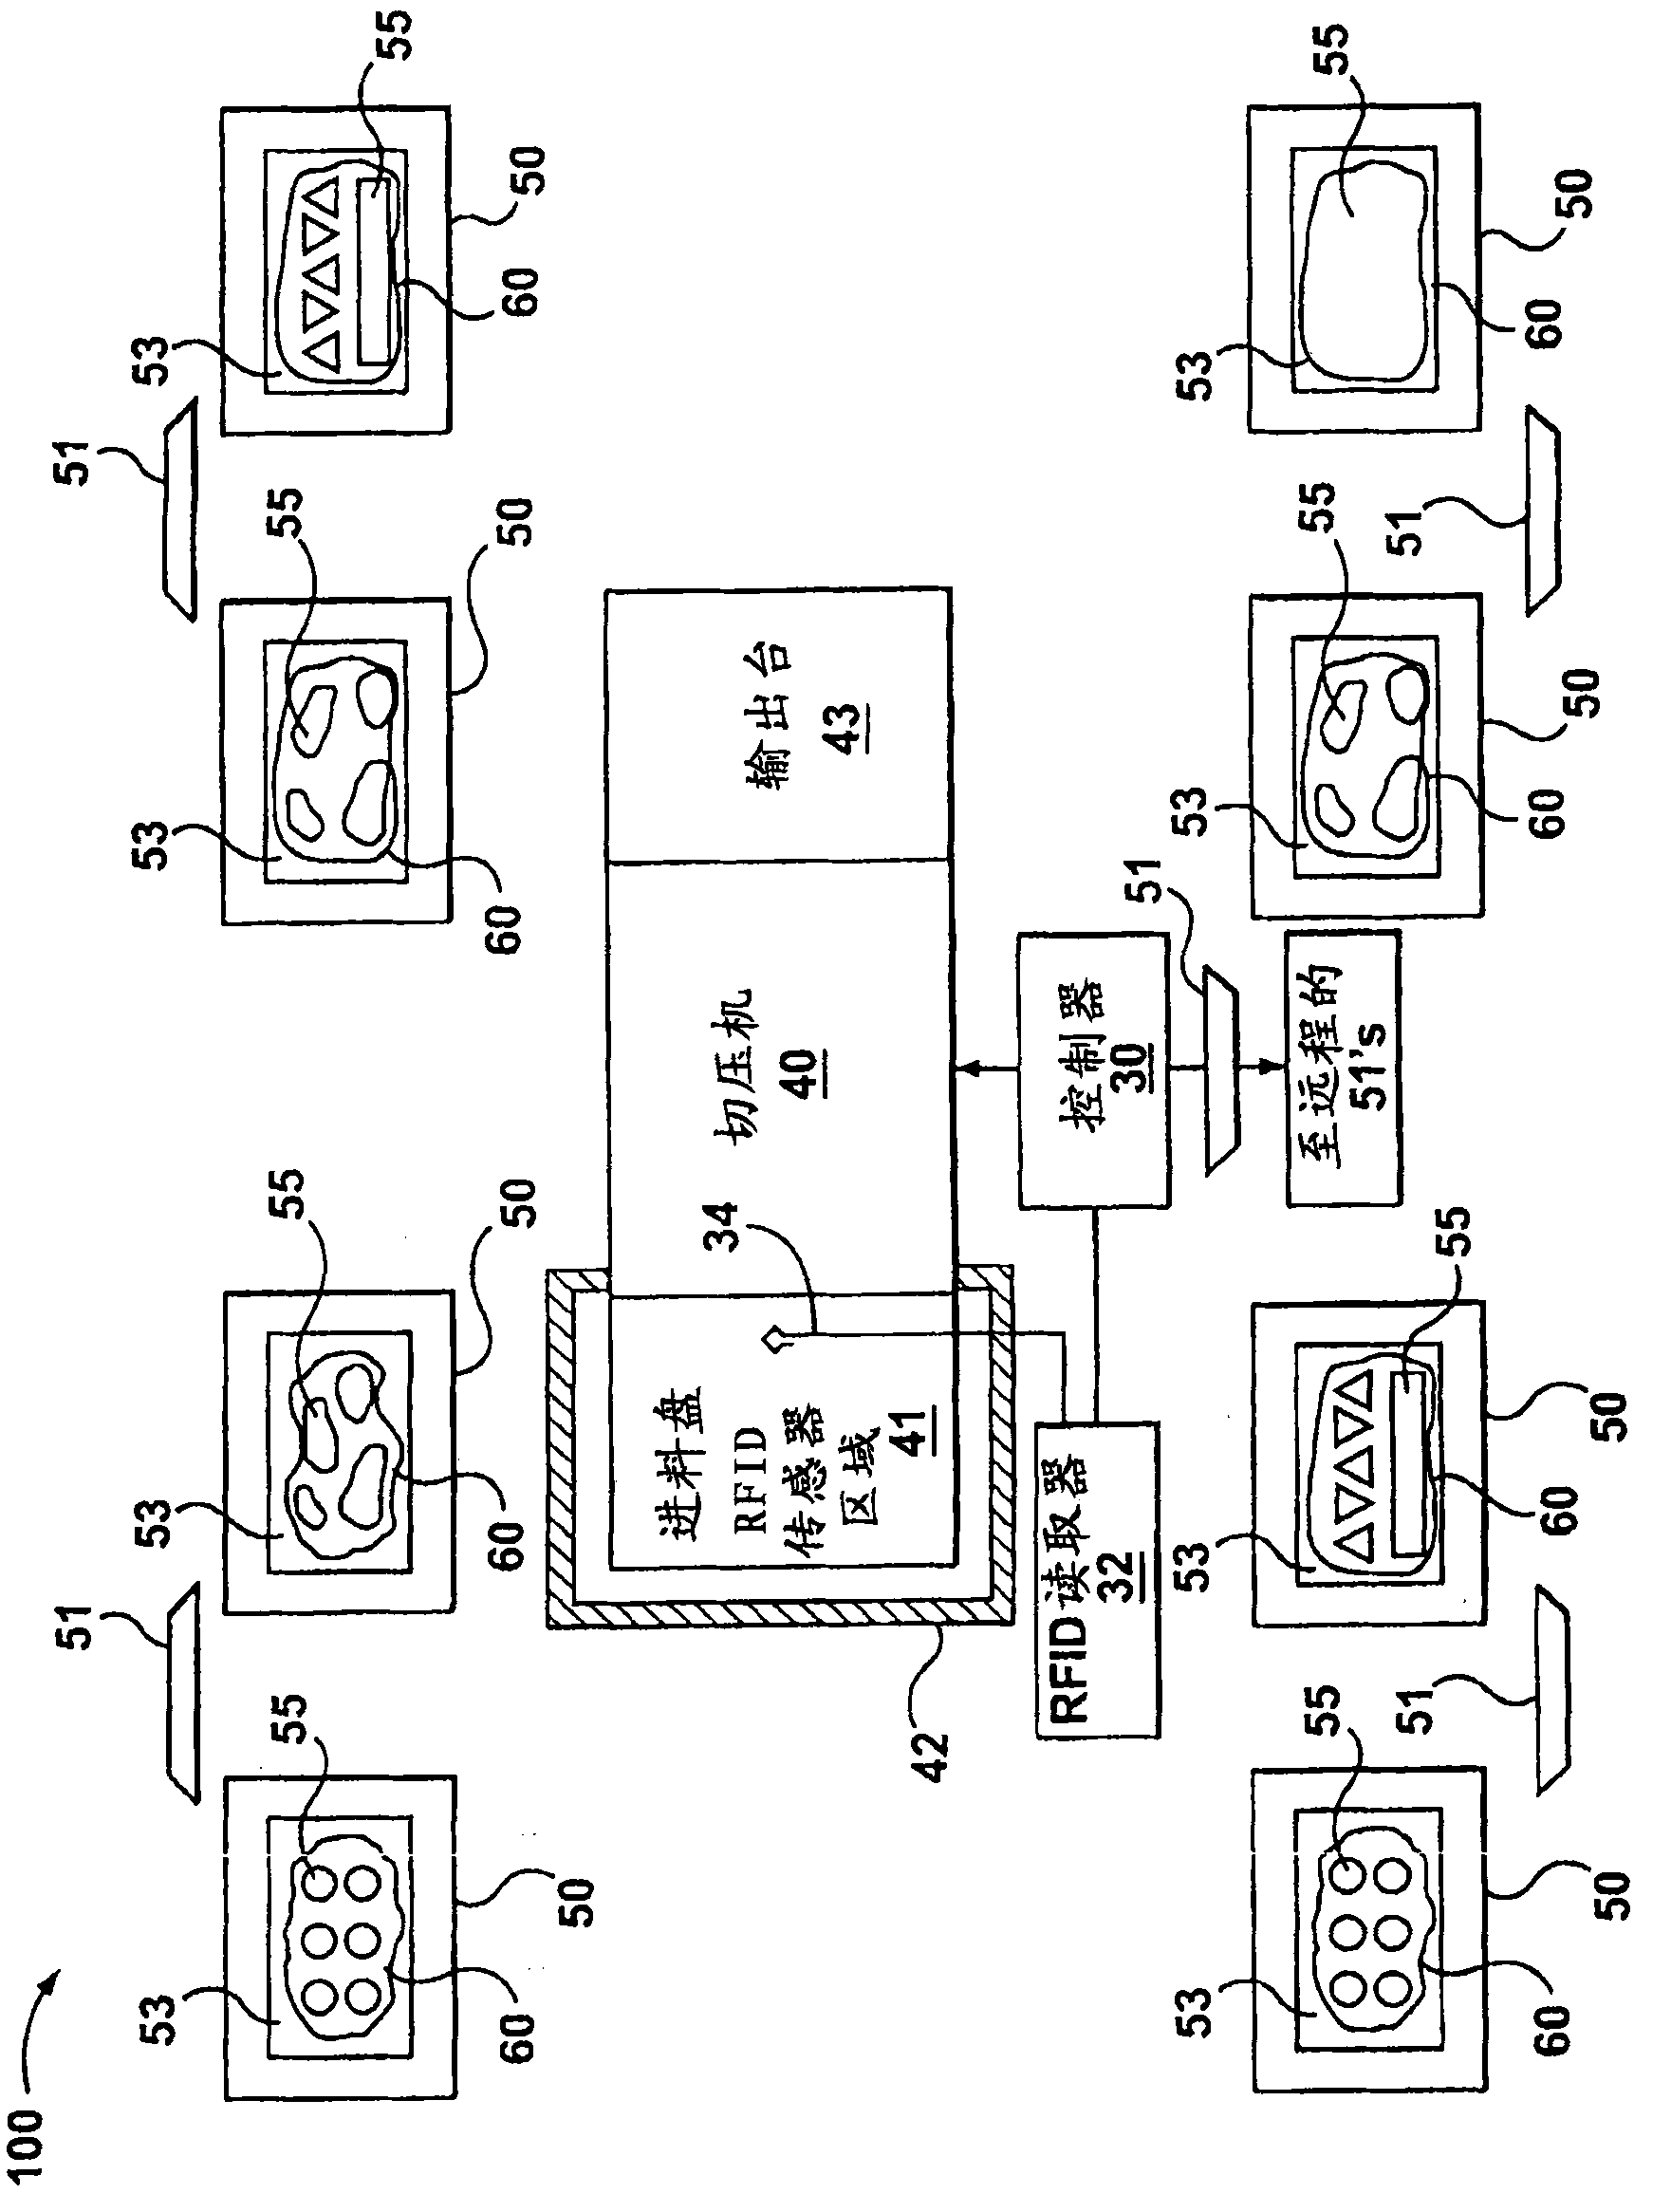 Systems and methods for real-time monitoring of die use or yield